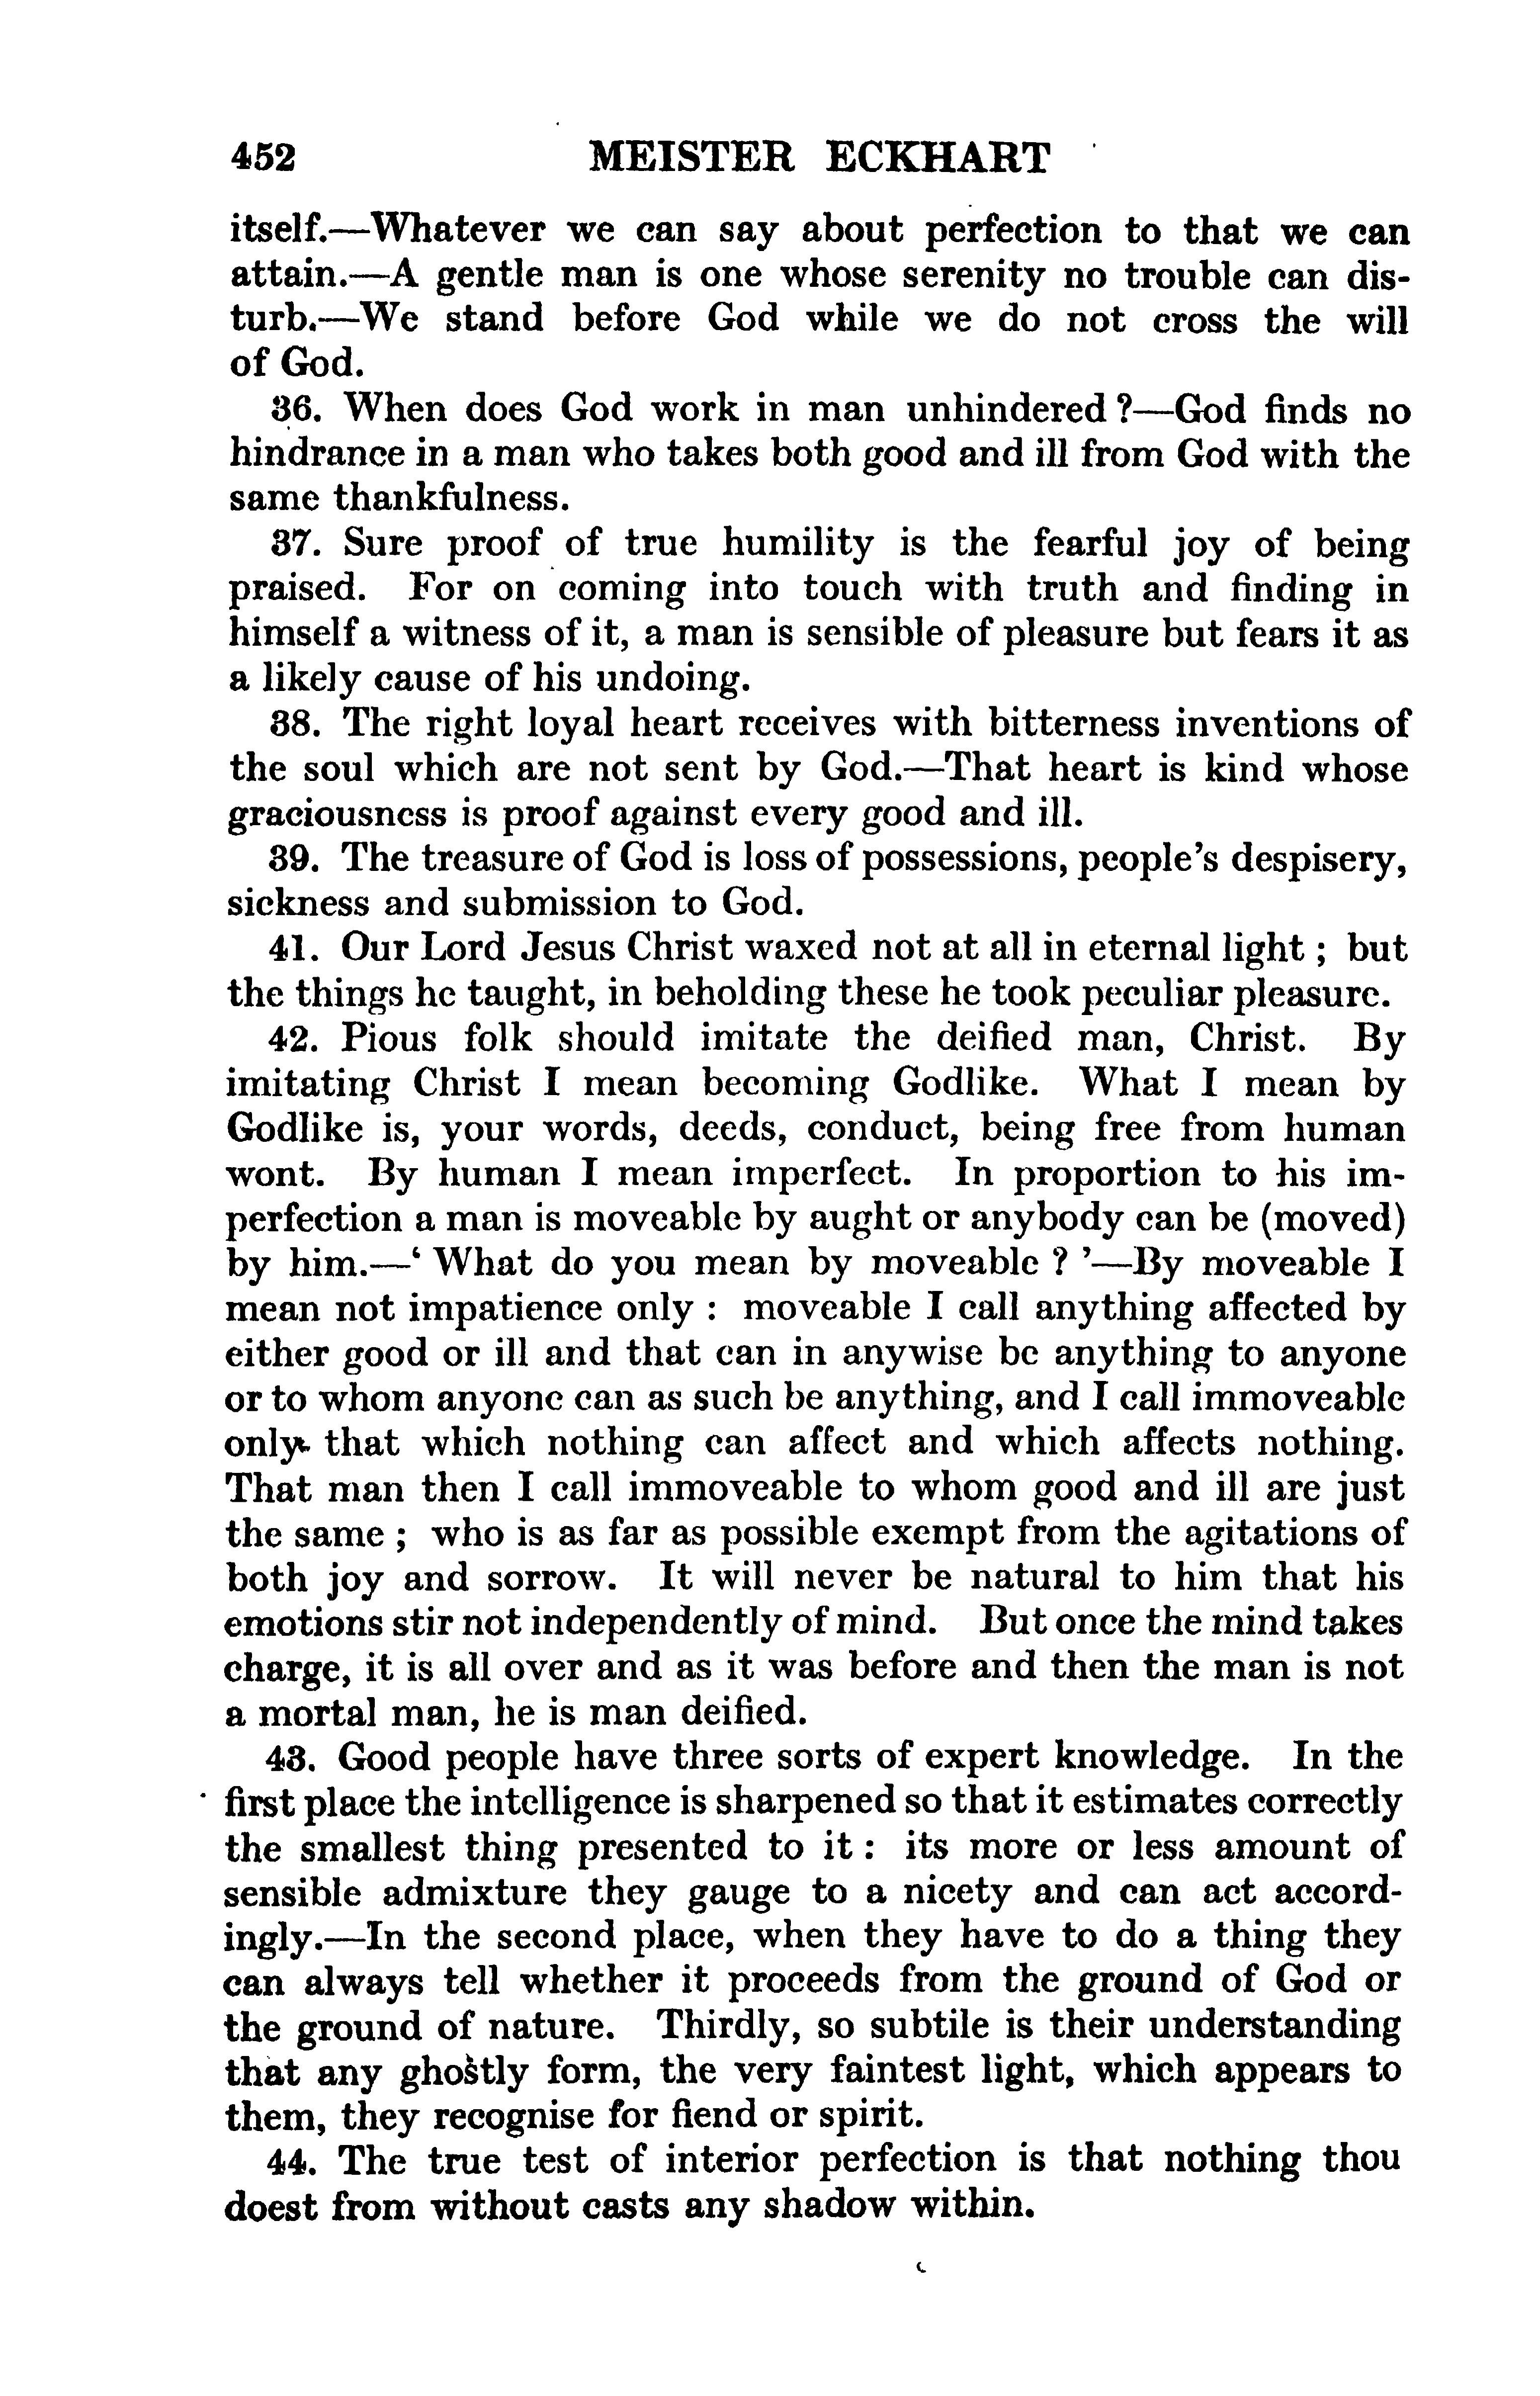 Image of page 0476